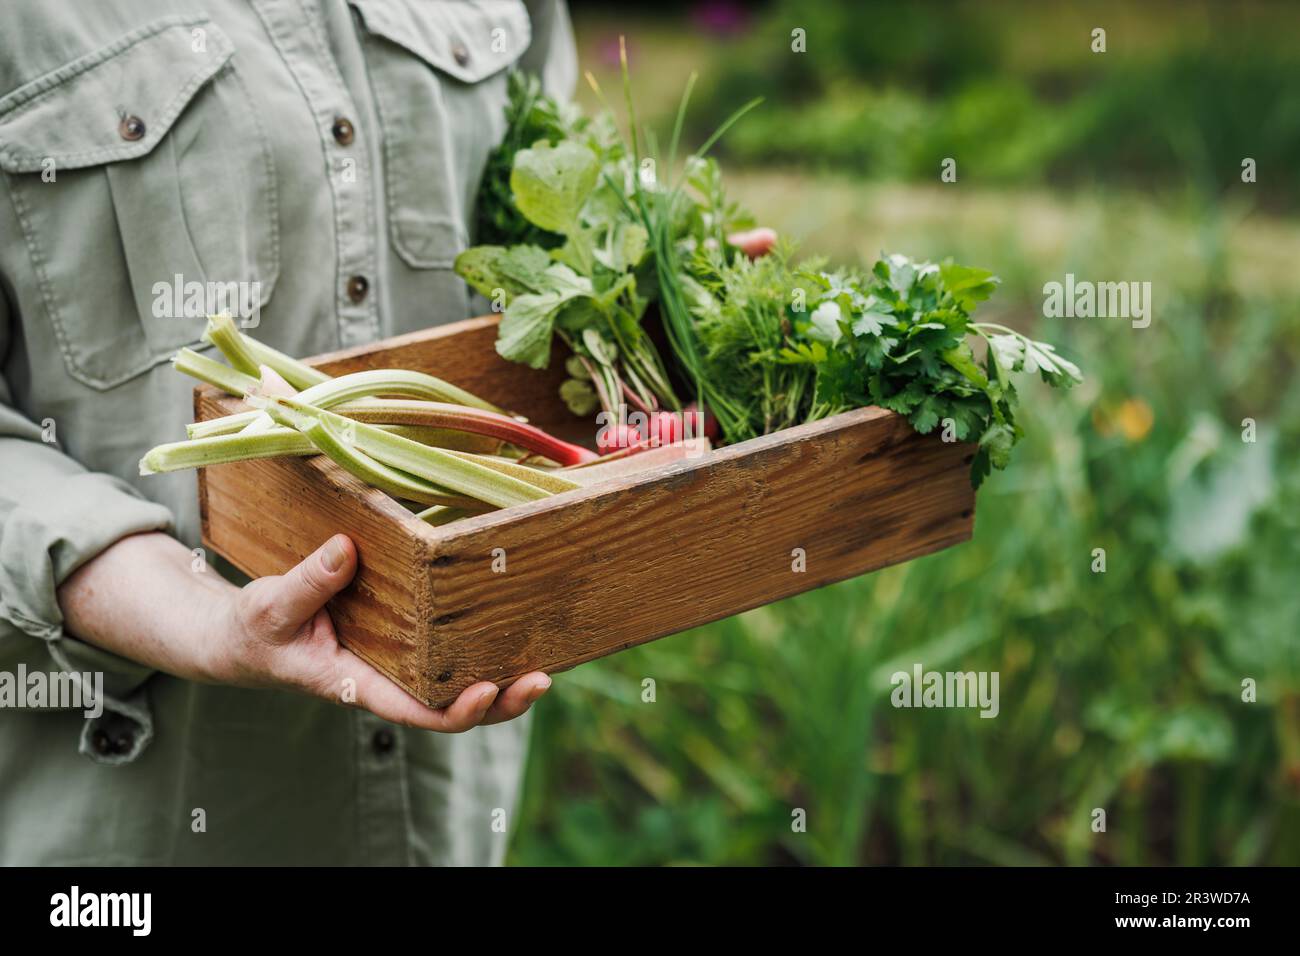 Woman freshly picked vegetable from garden. Harvest in organic farm. Farmer holding wooden crate with rhubarb, radish and parsley leaves Stock Photo